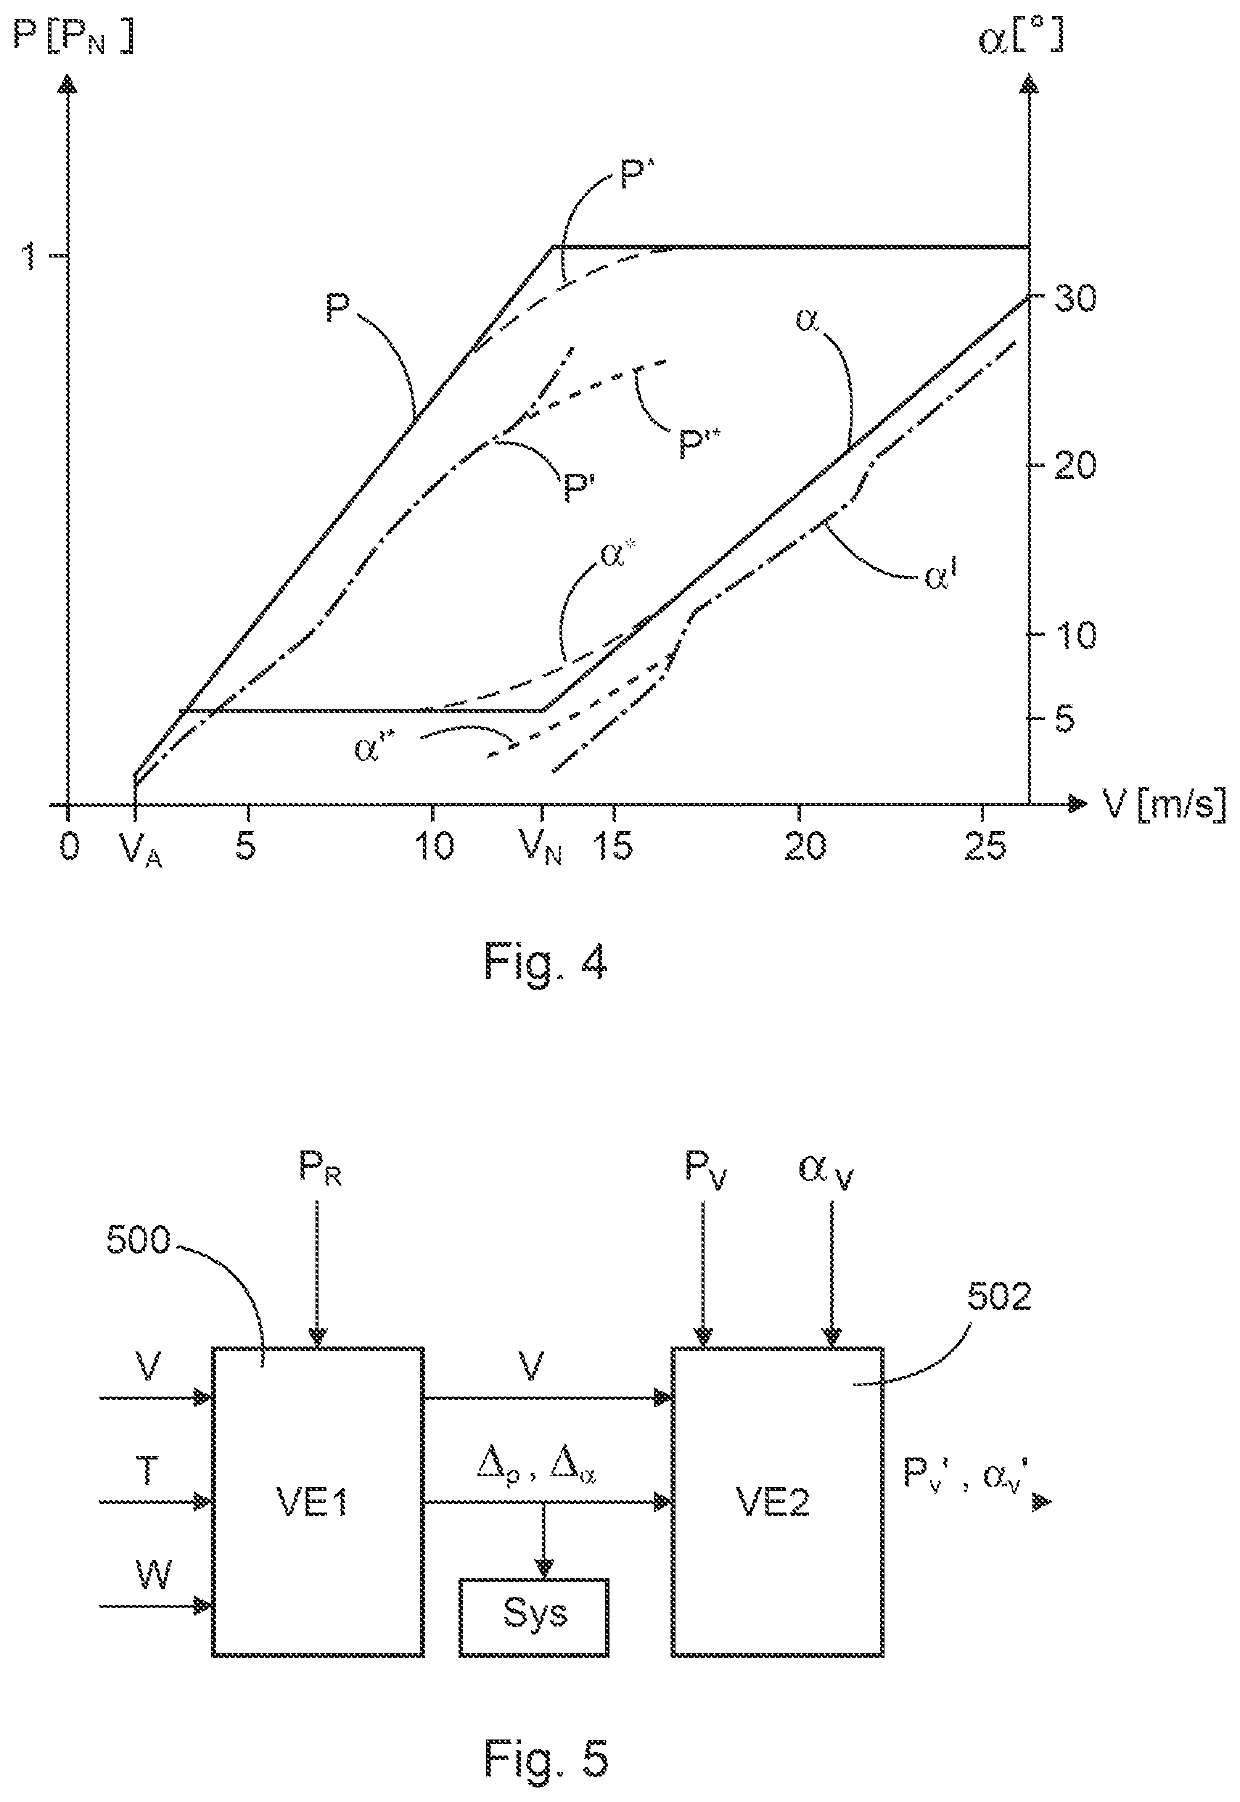 Method for detecting an accretion of ice on a wind turbine